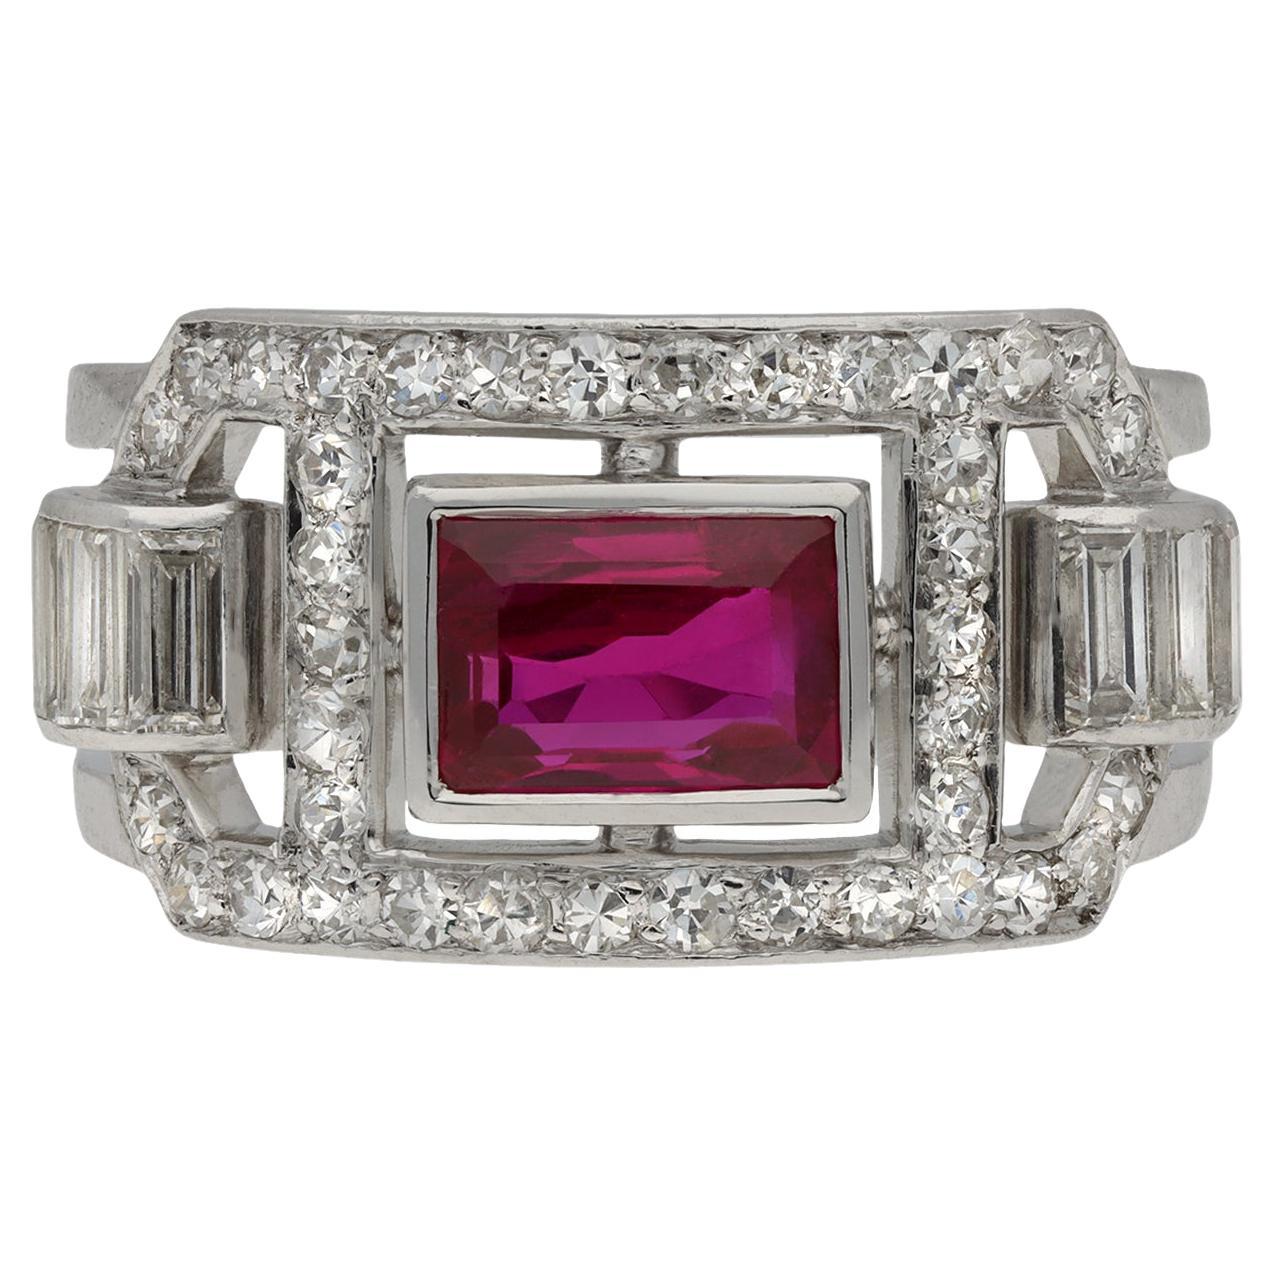 Mauboussin Burmese Ruby and Diamond Ring, French, circa 1929 For Sale